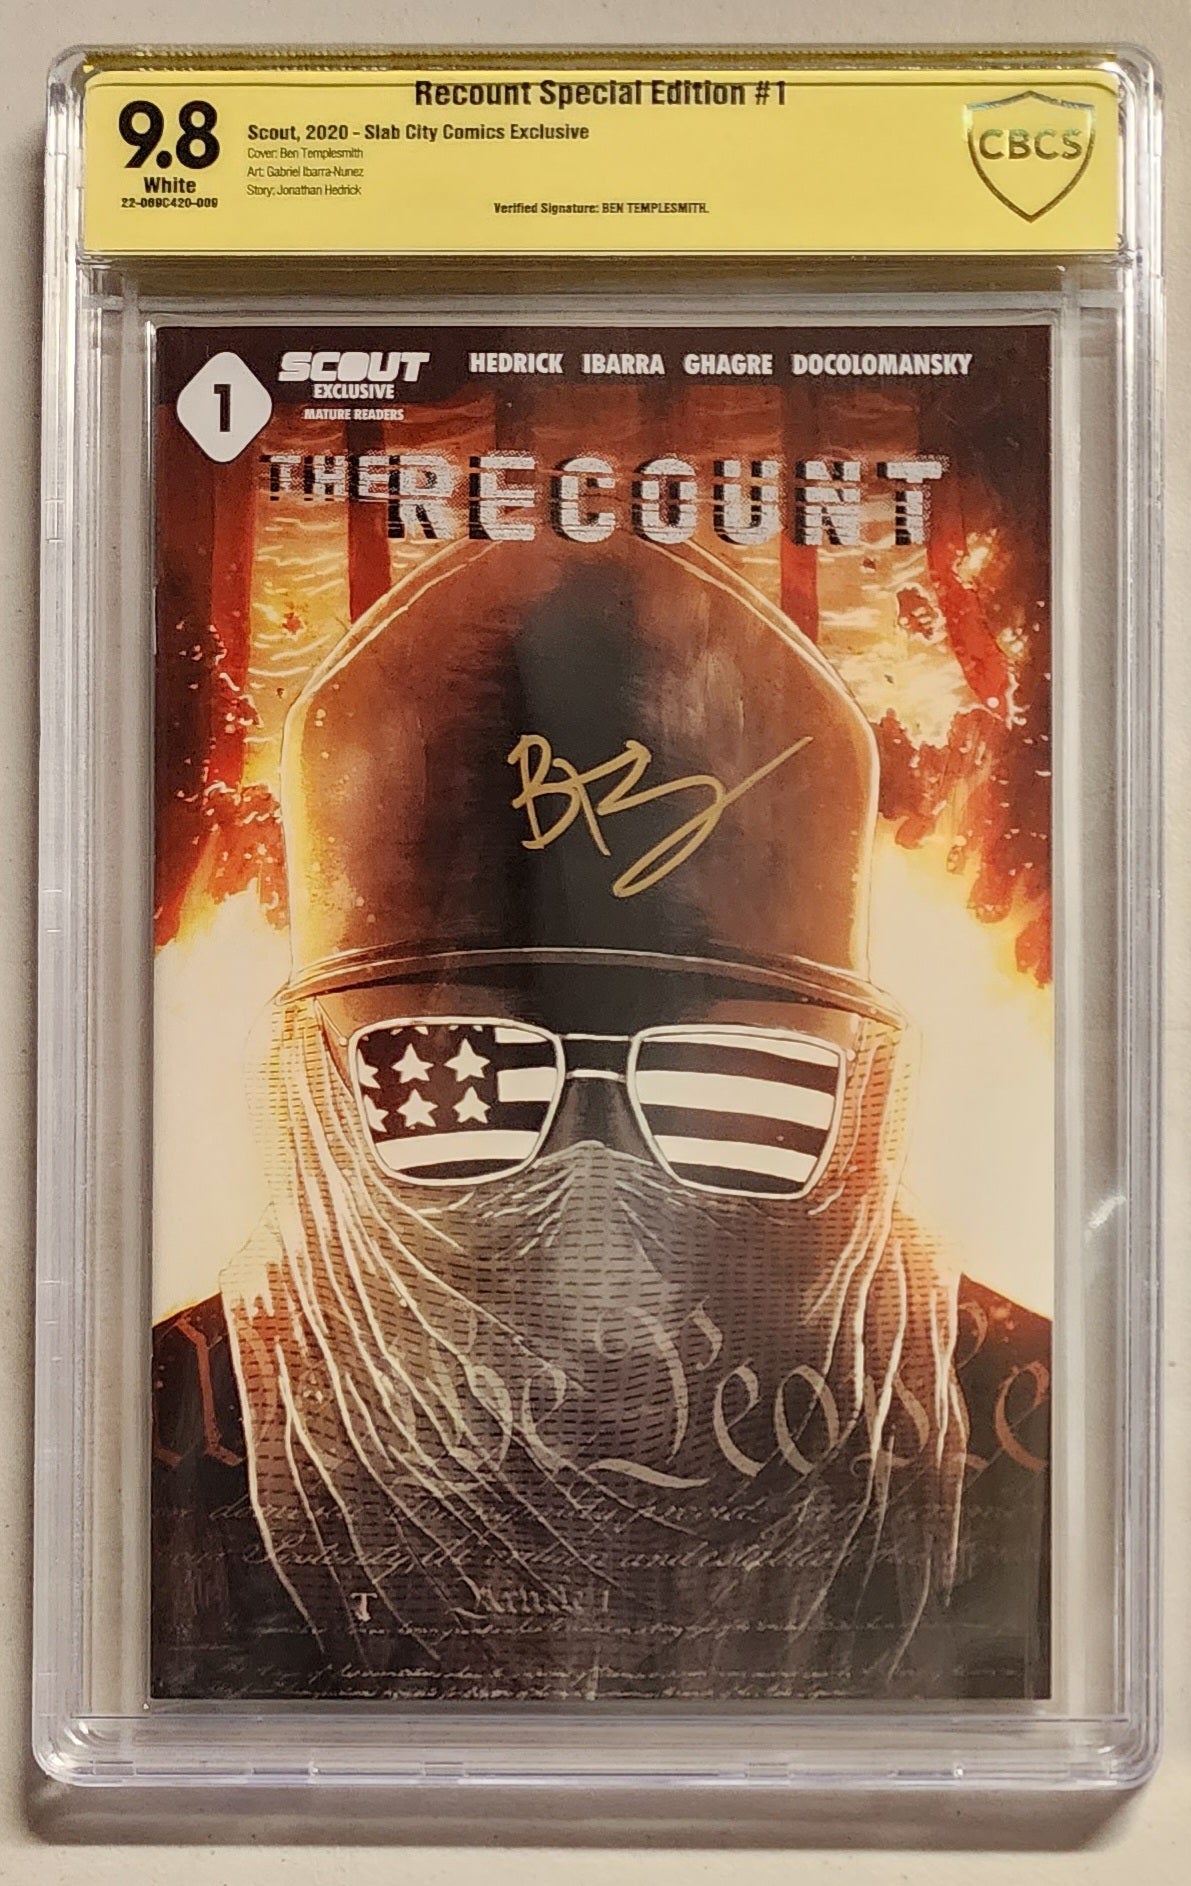 9.8 CBCS RECOUNT #1 VARIANT SIGNED BY BEN TEMPLESMITH [22-069C420-009]